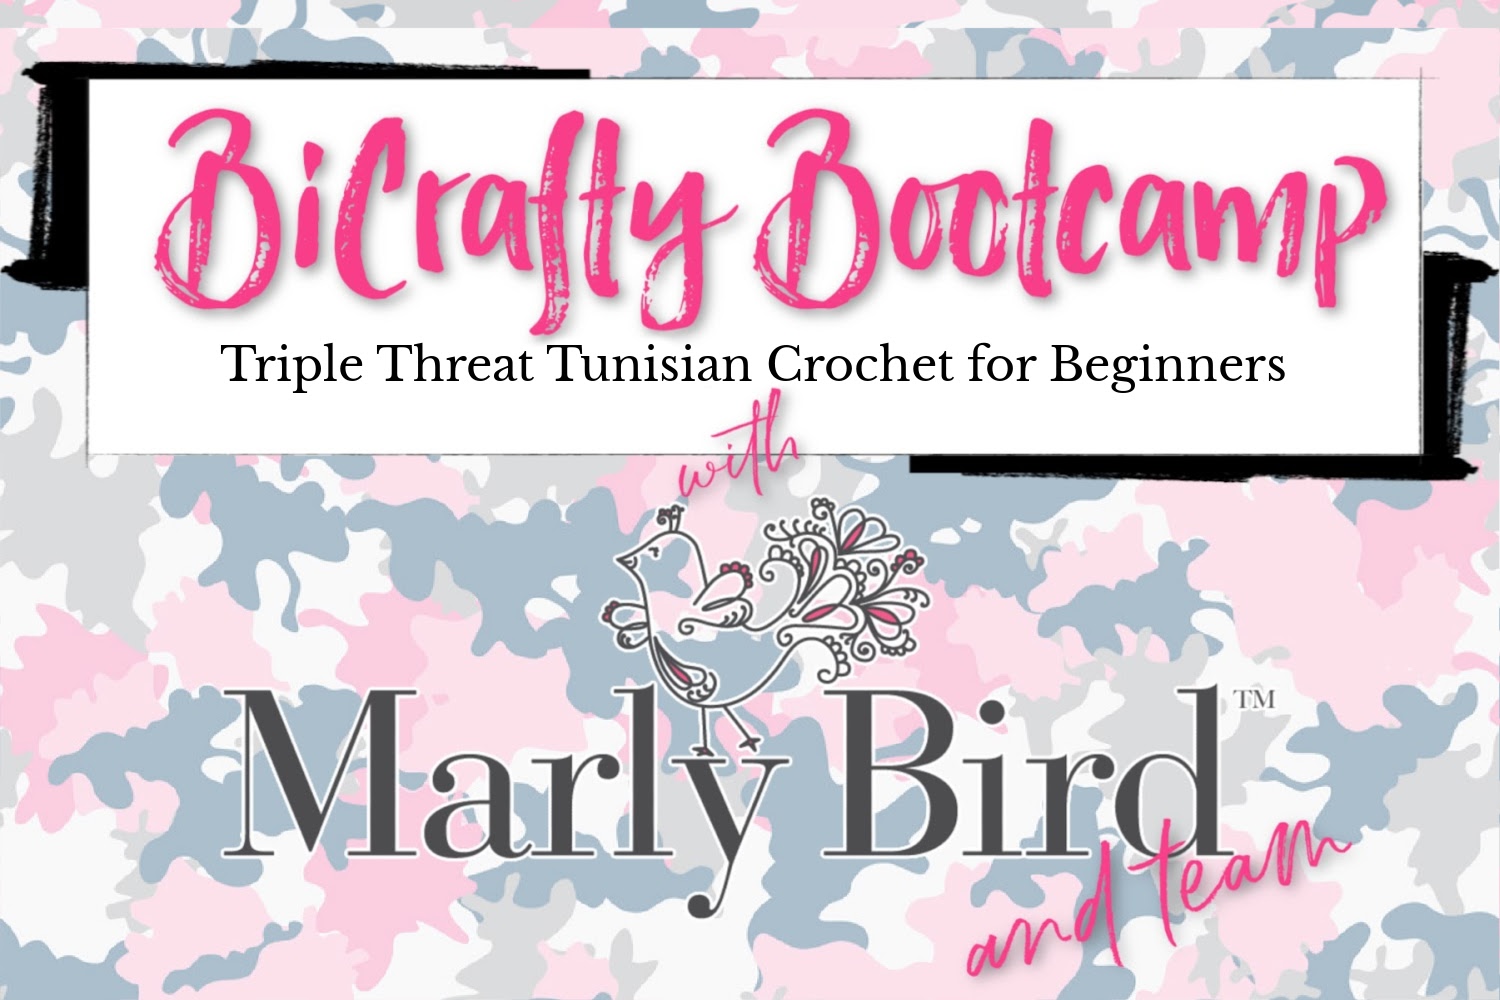 Promotional graphic for "Triple Threat Tunisian Crochet Bootcamp for Beginners" featuring stylized text and a camo background, presented by Marly Bird and team. -Marly Bird